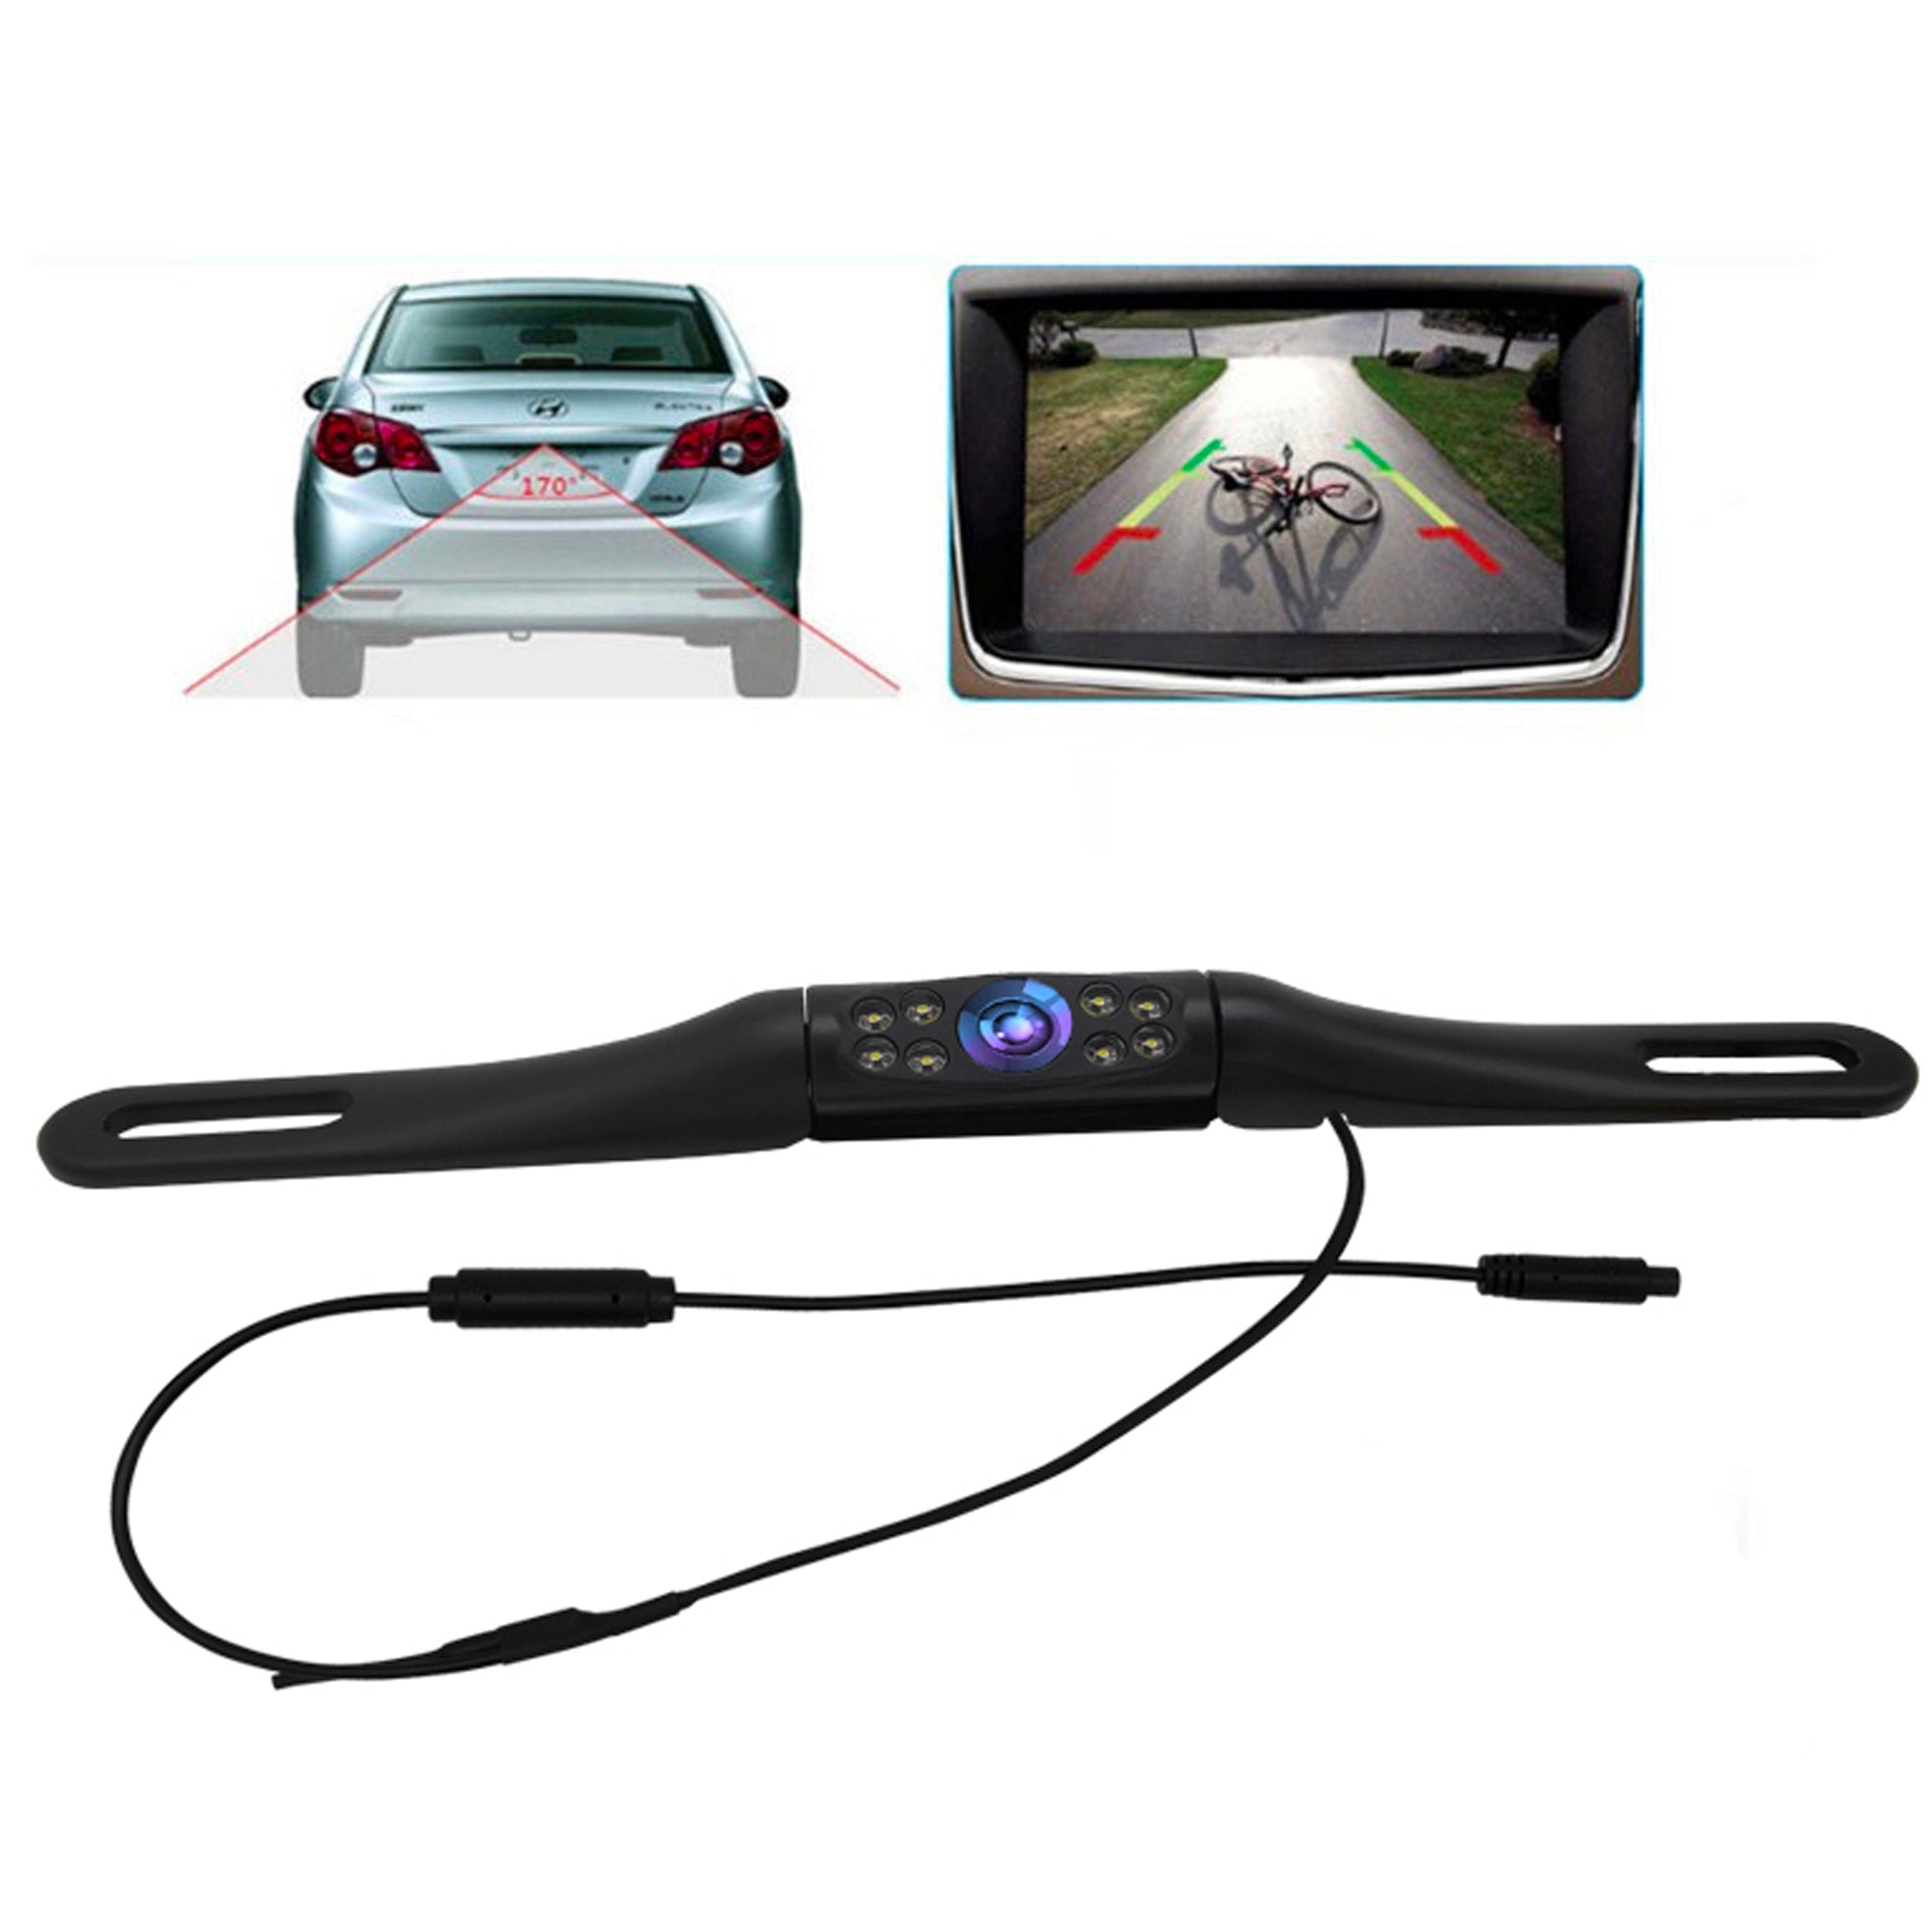 Falcon Electronics WiFi License Plate Backup Camera, Use Smartphone to View Video